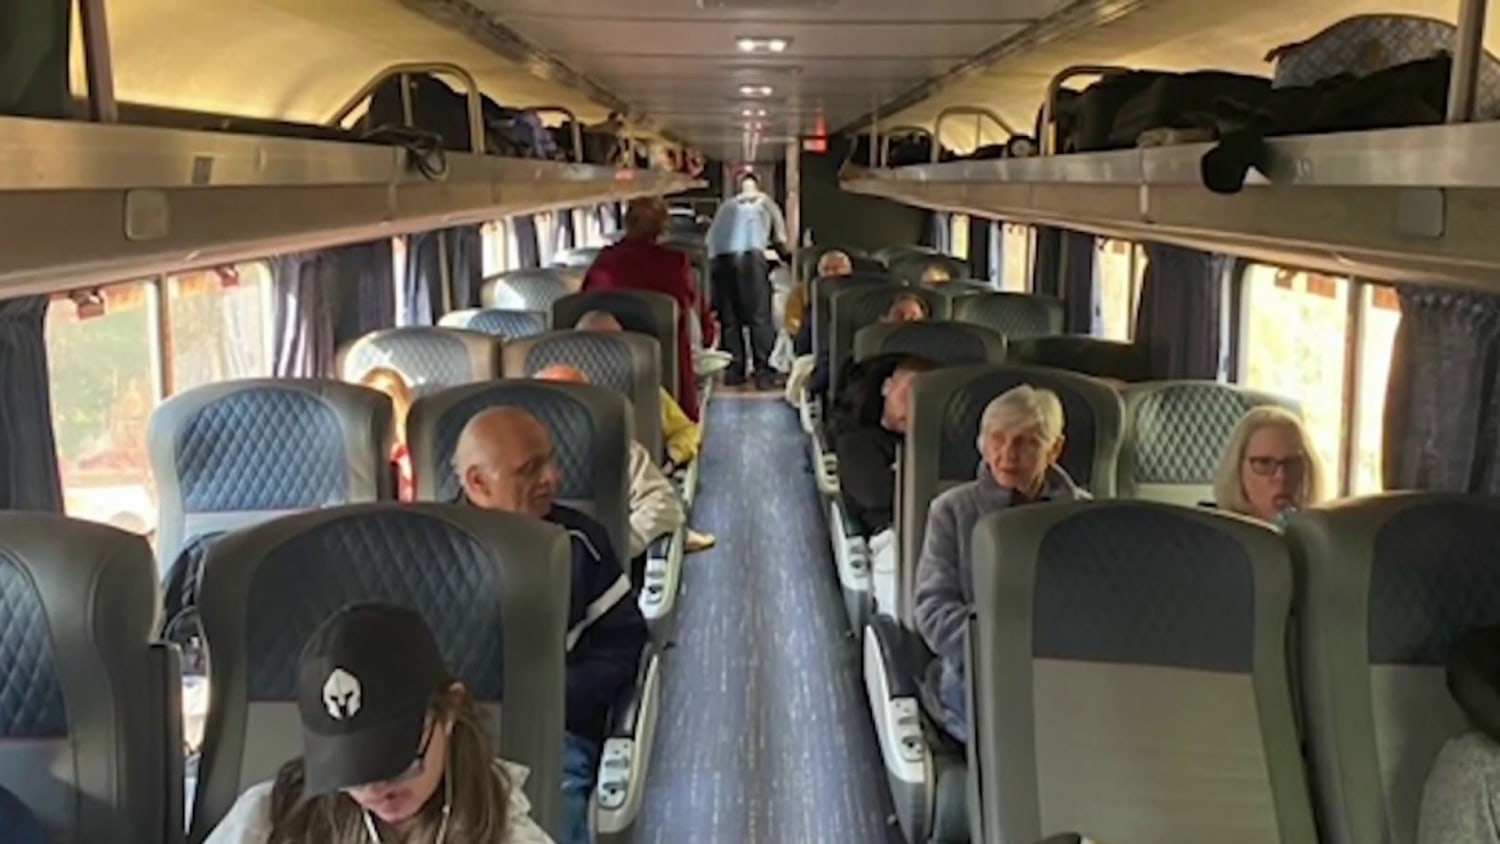 Passengers were stuck on an Amtrak train for hours in rural South Carolina